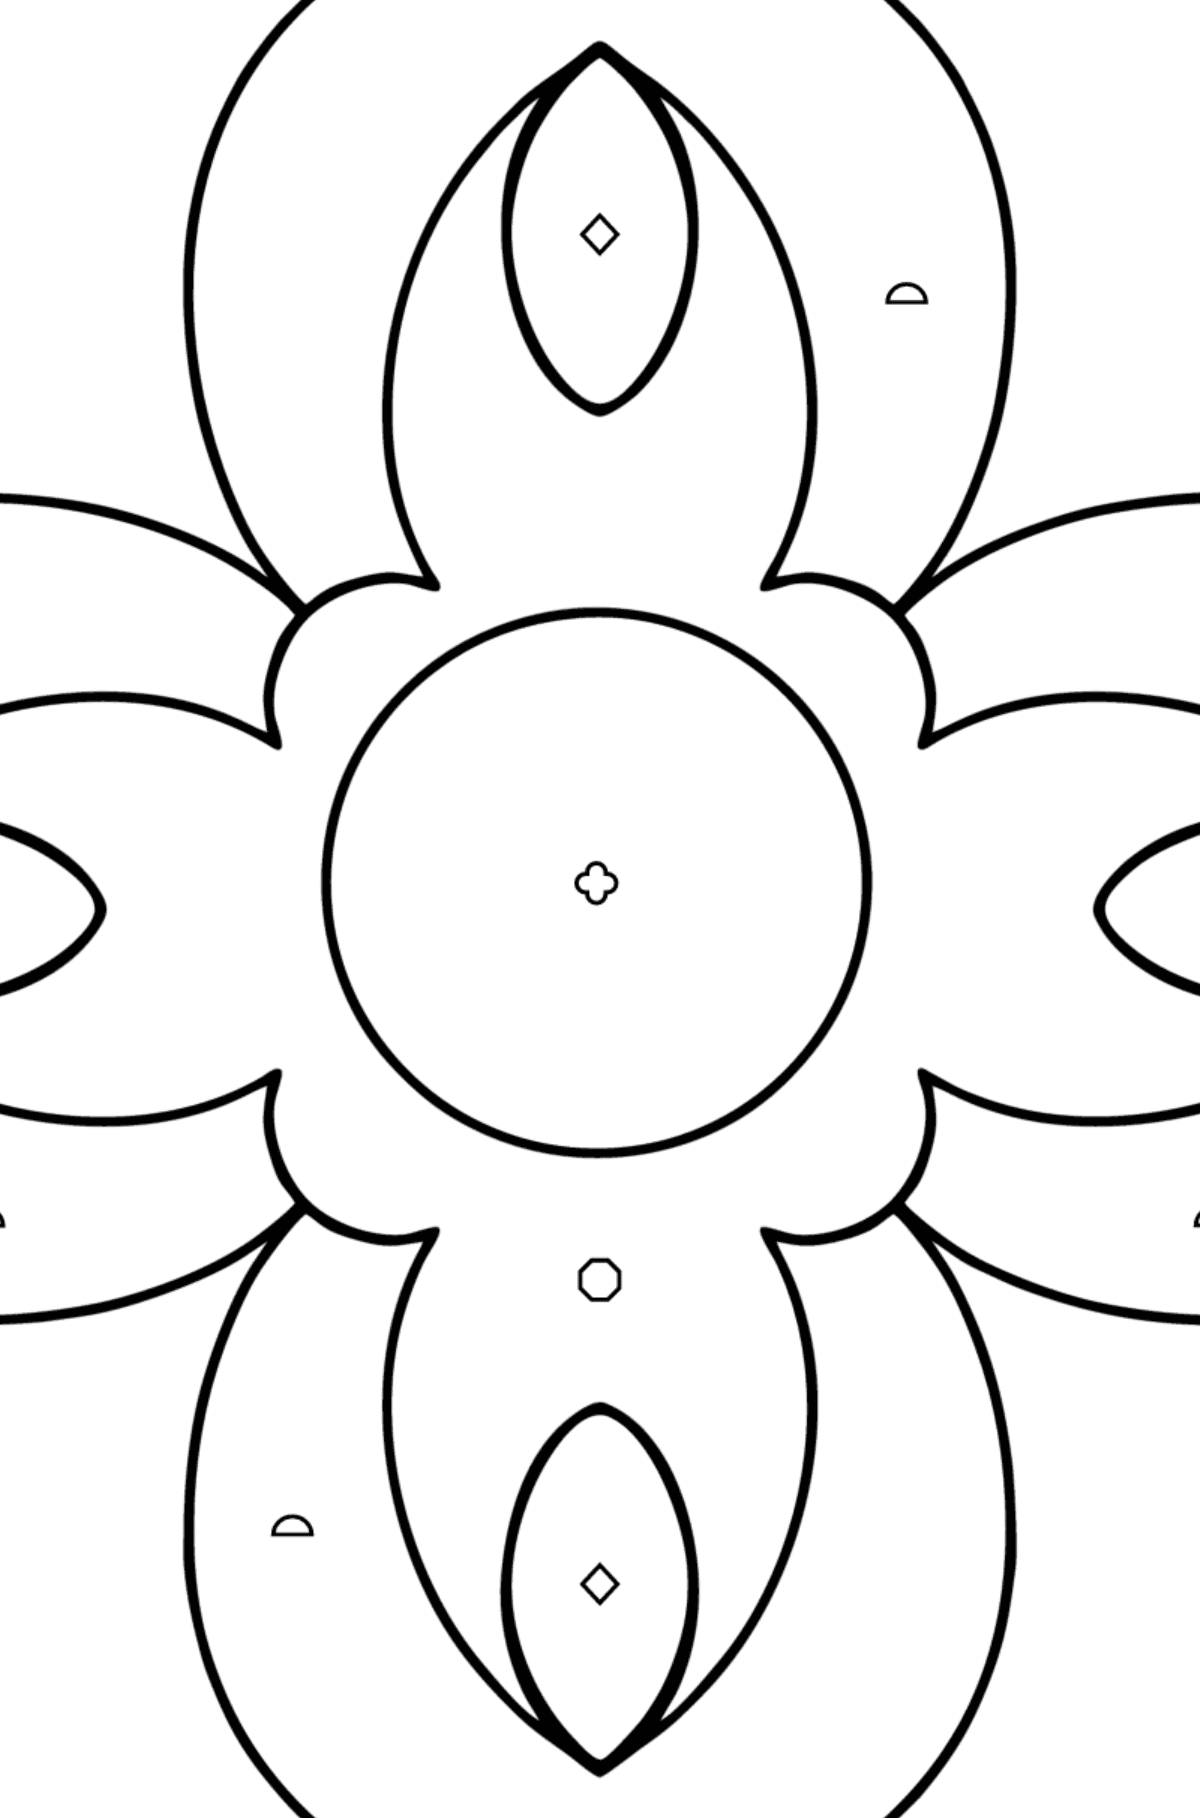 Coloring book for kids - Anti stress flower - Coloring by Geometric Shapes for Kids